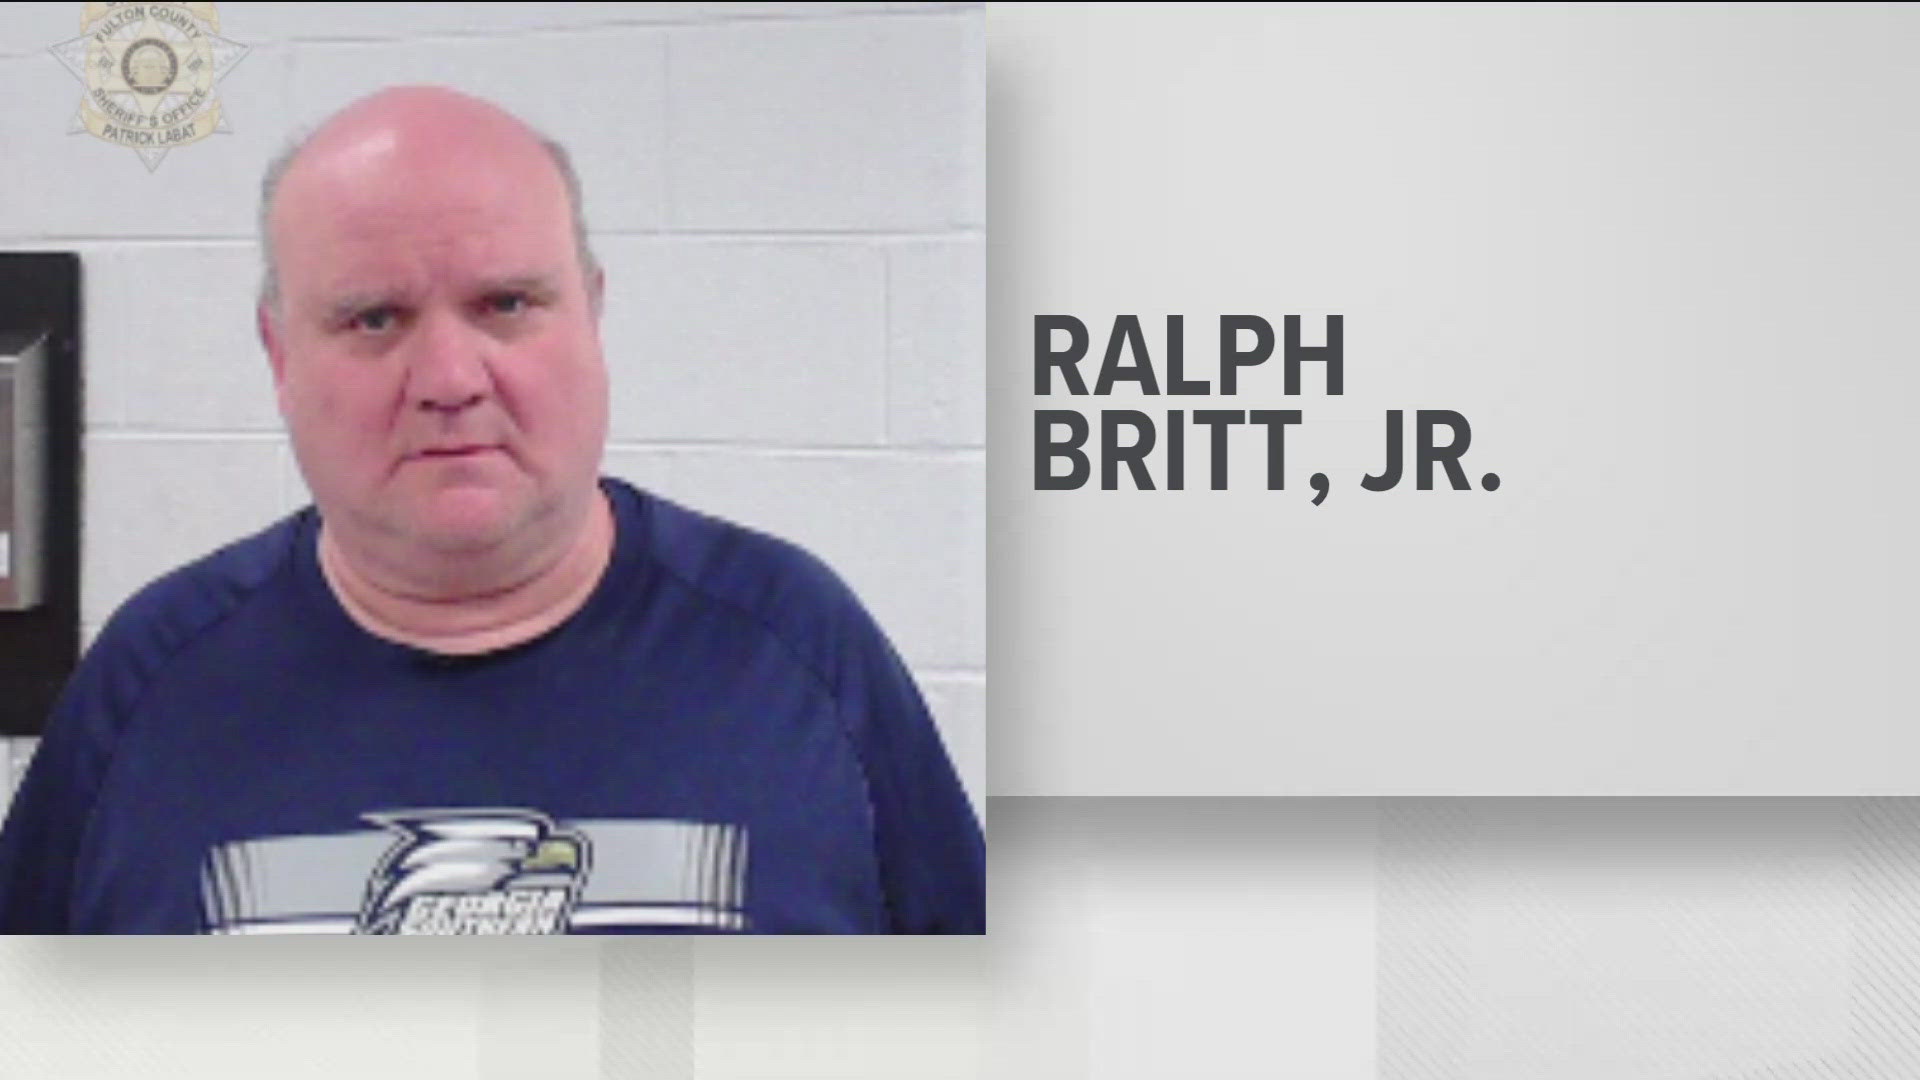 59-year-old Ralph Britt Jr. faces multiple charges.